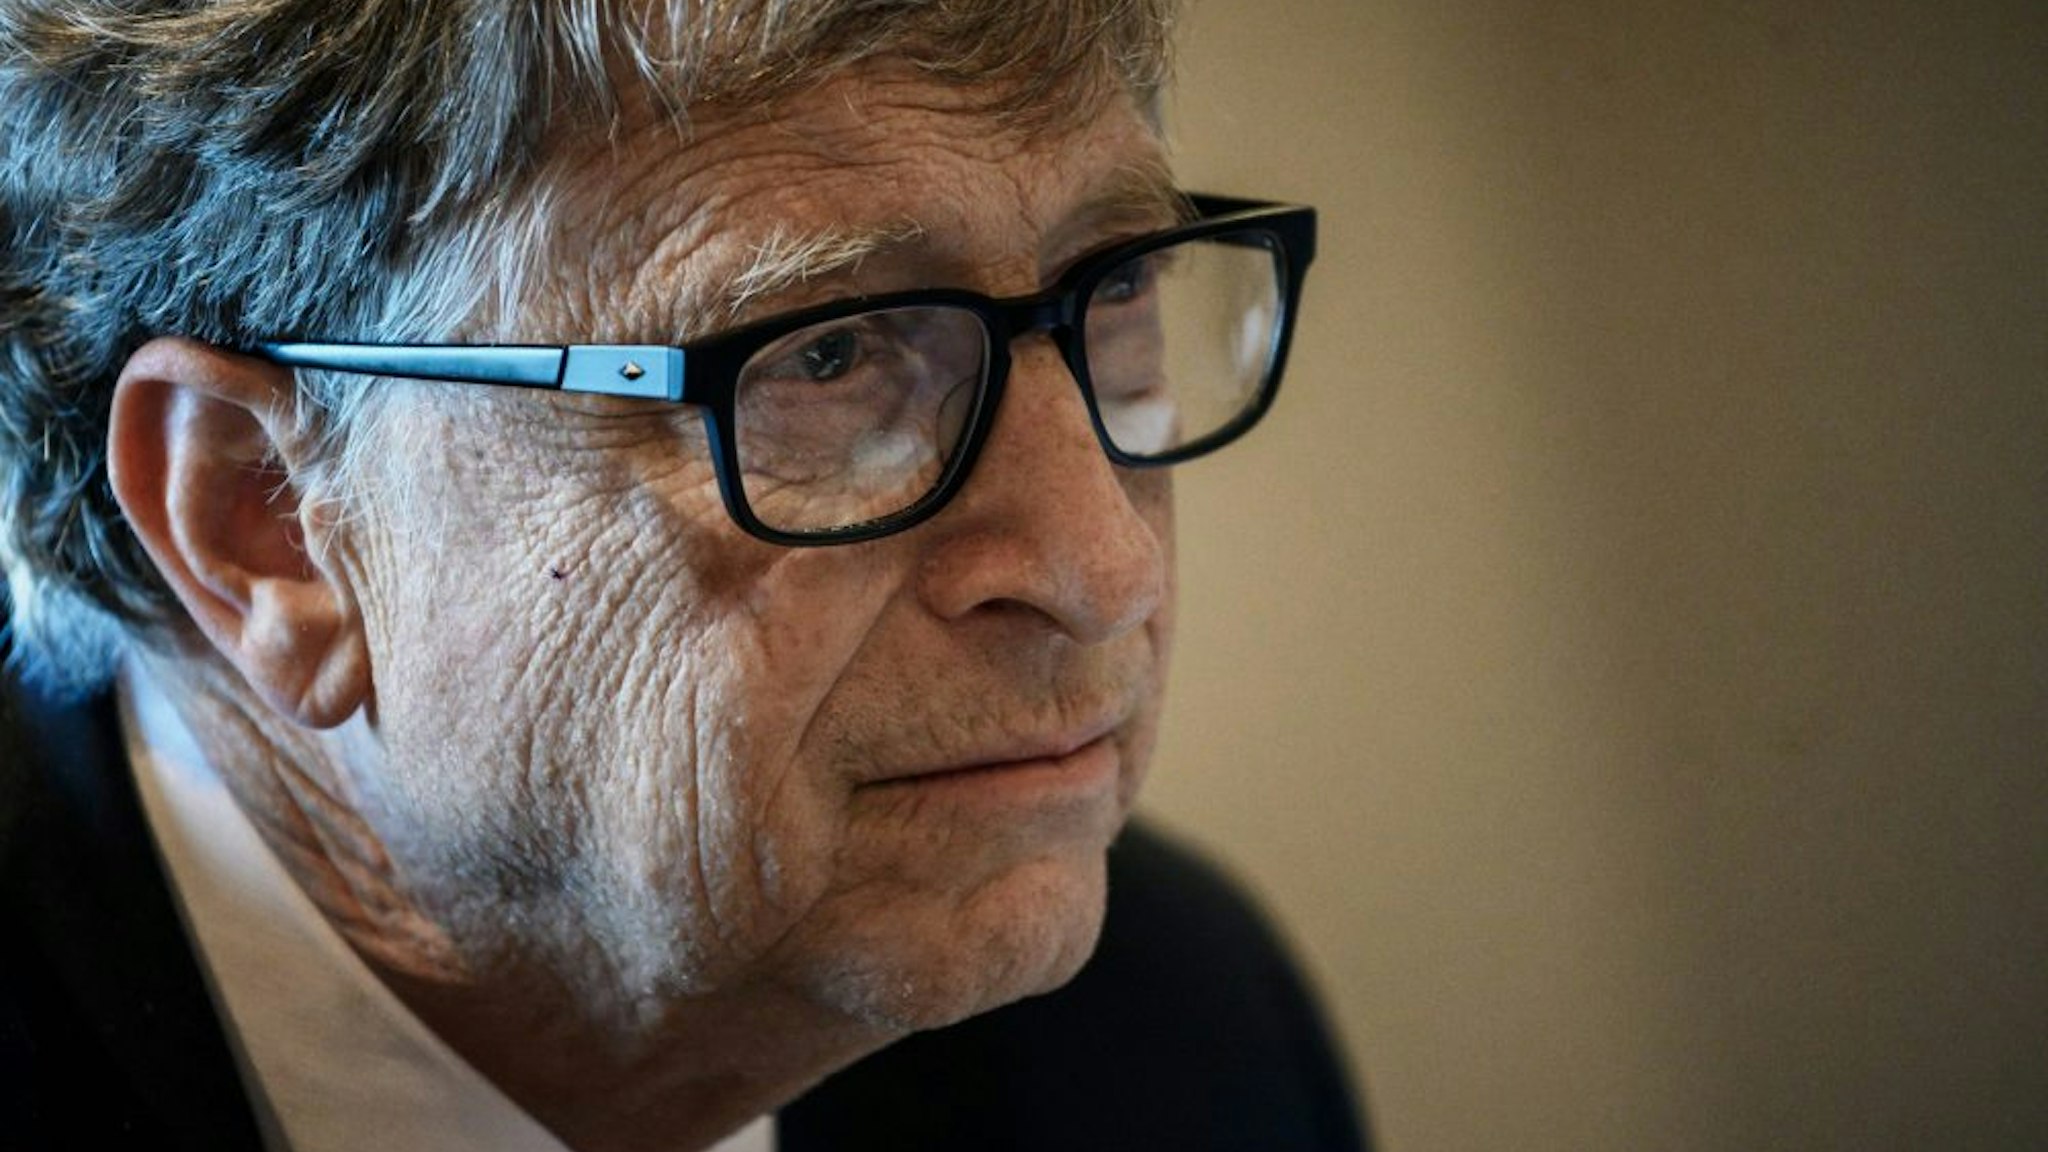 US Microsoft founder, Co-Chairman of the Bill &amp; Melinda Gates Foundation, Bill Gates, takes part in a conference call on October 9, 2019, in Lyon, central eastern France, during the funding conference of Global Fund to Fight AIDS, Tuberculosis and Malaria. - The Global Fund to Fight AIDS, Tuberculosis and Malaria on October 9, 2019, opened a drive to raise $14 billion to fight a global epidemics but face an uphill battle in the face of donor fatigue. The fund has asked for $14 billion, an amount it says would help save 16 million lives, avert "234 million infections" and place the world back on track to meet the UN objective of ending the epidemics of HIV/AIDS, tuberculosis and malaria within 10 years.